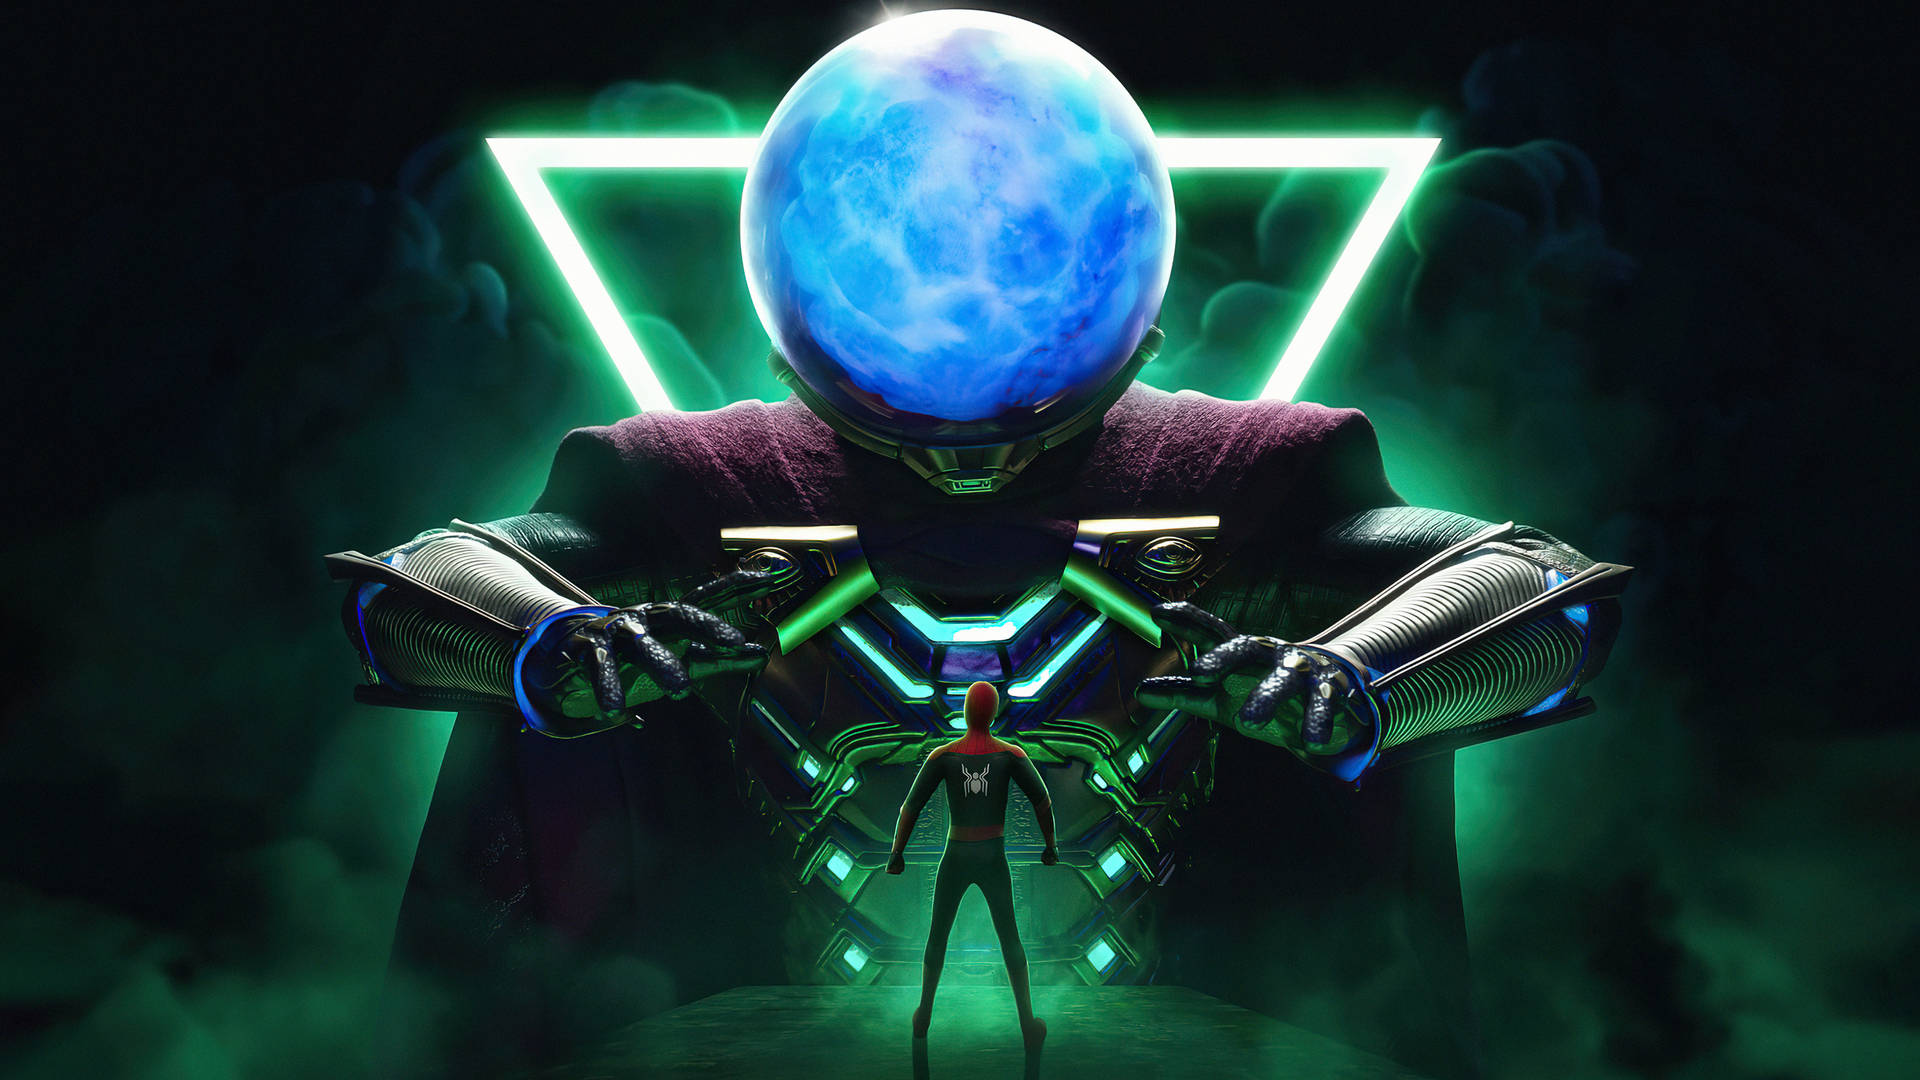 "Mysterio in Full Glory: Master of Illusion and Manipulation" Wallpaper